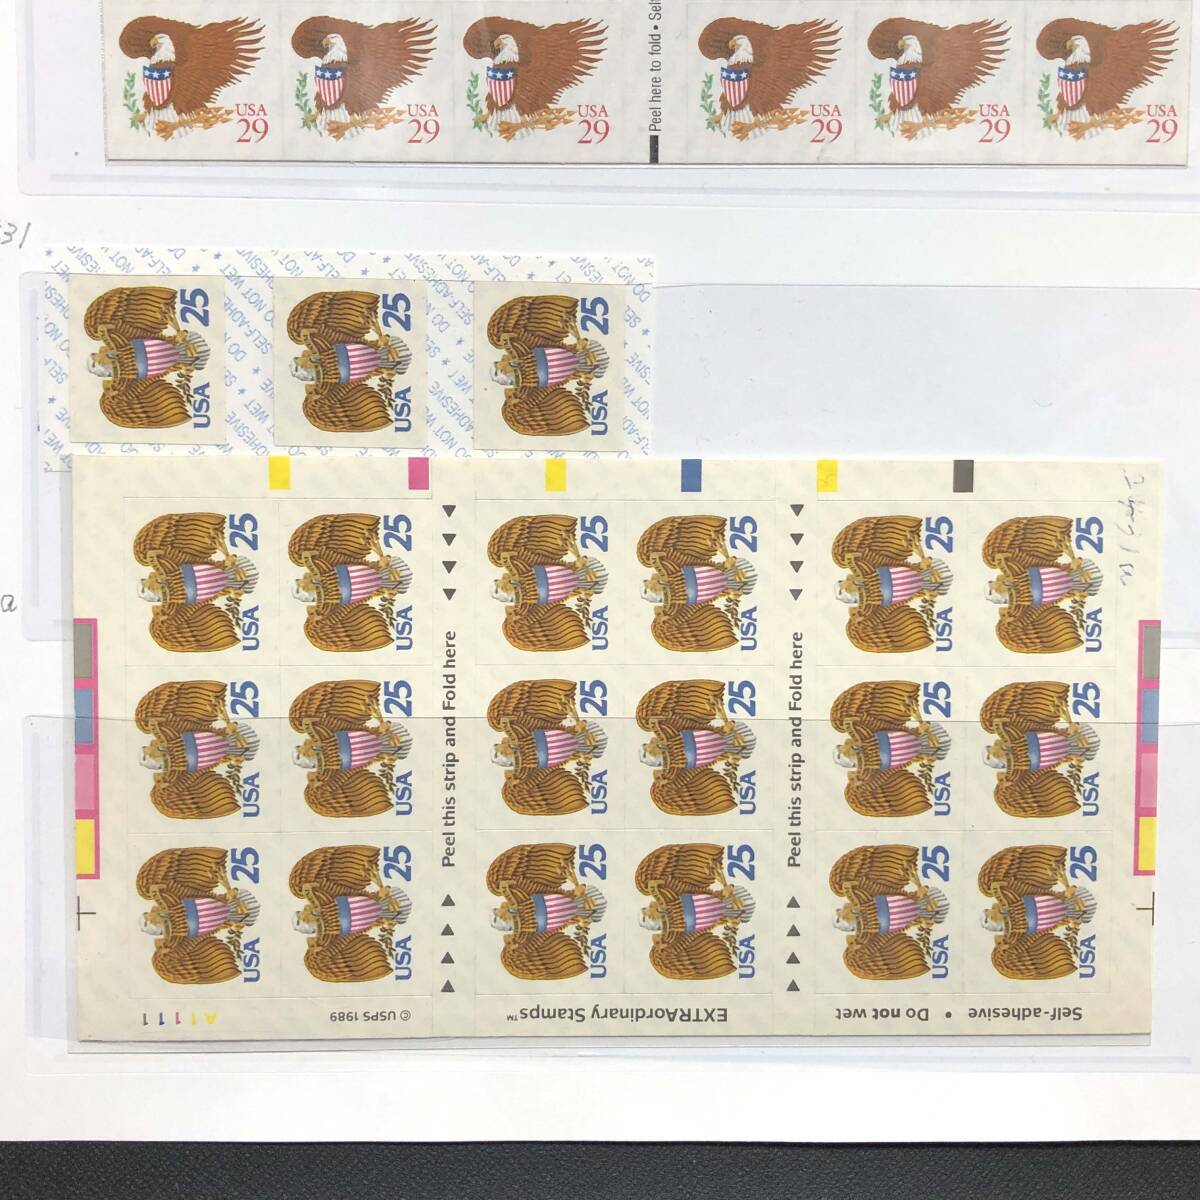 L[ foreign stamp ] America USA stamp American Eagle 25 29 collection 